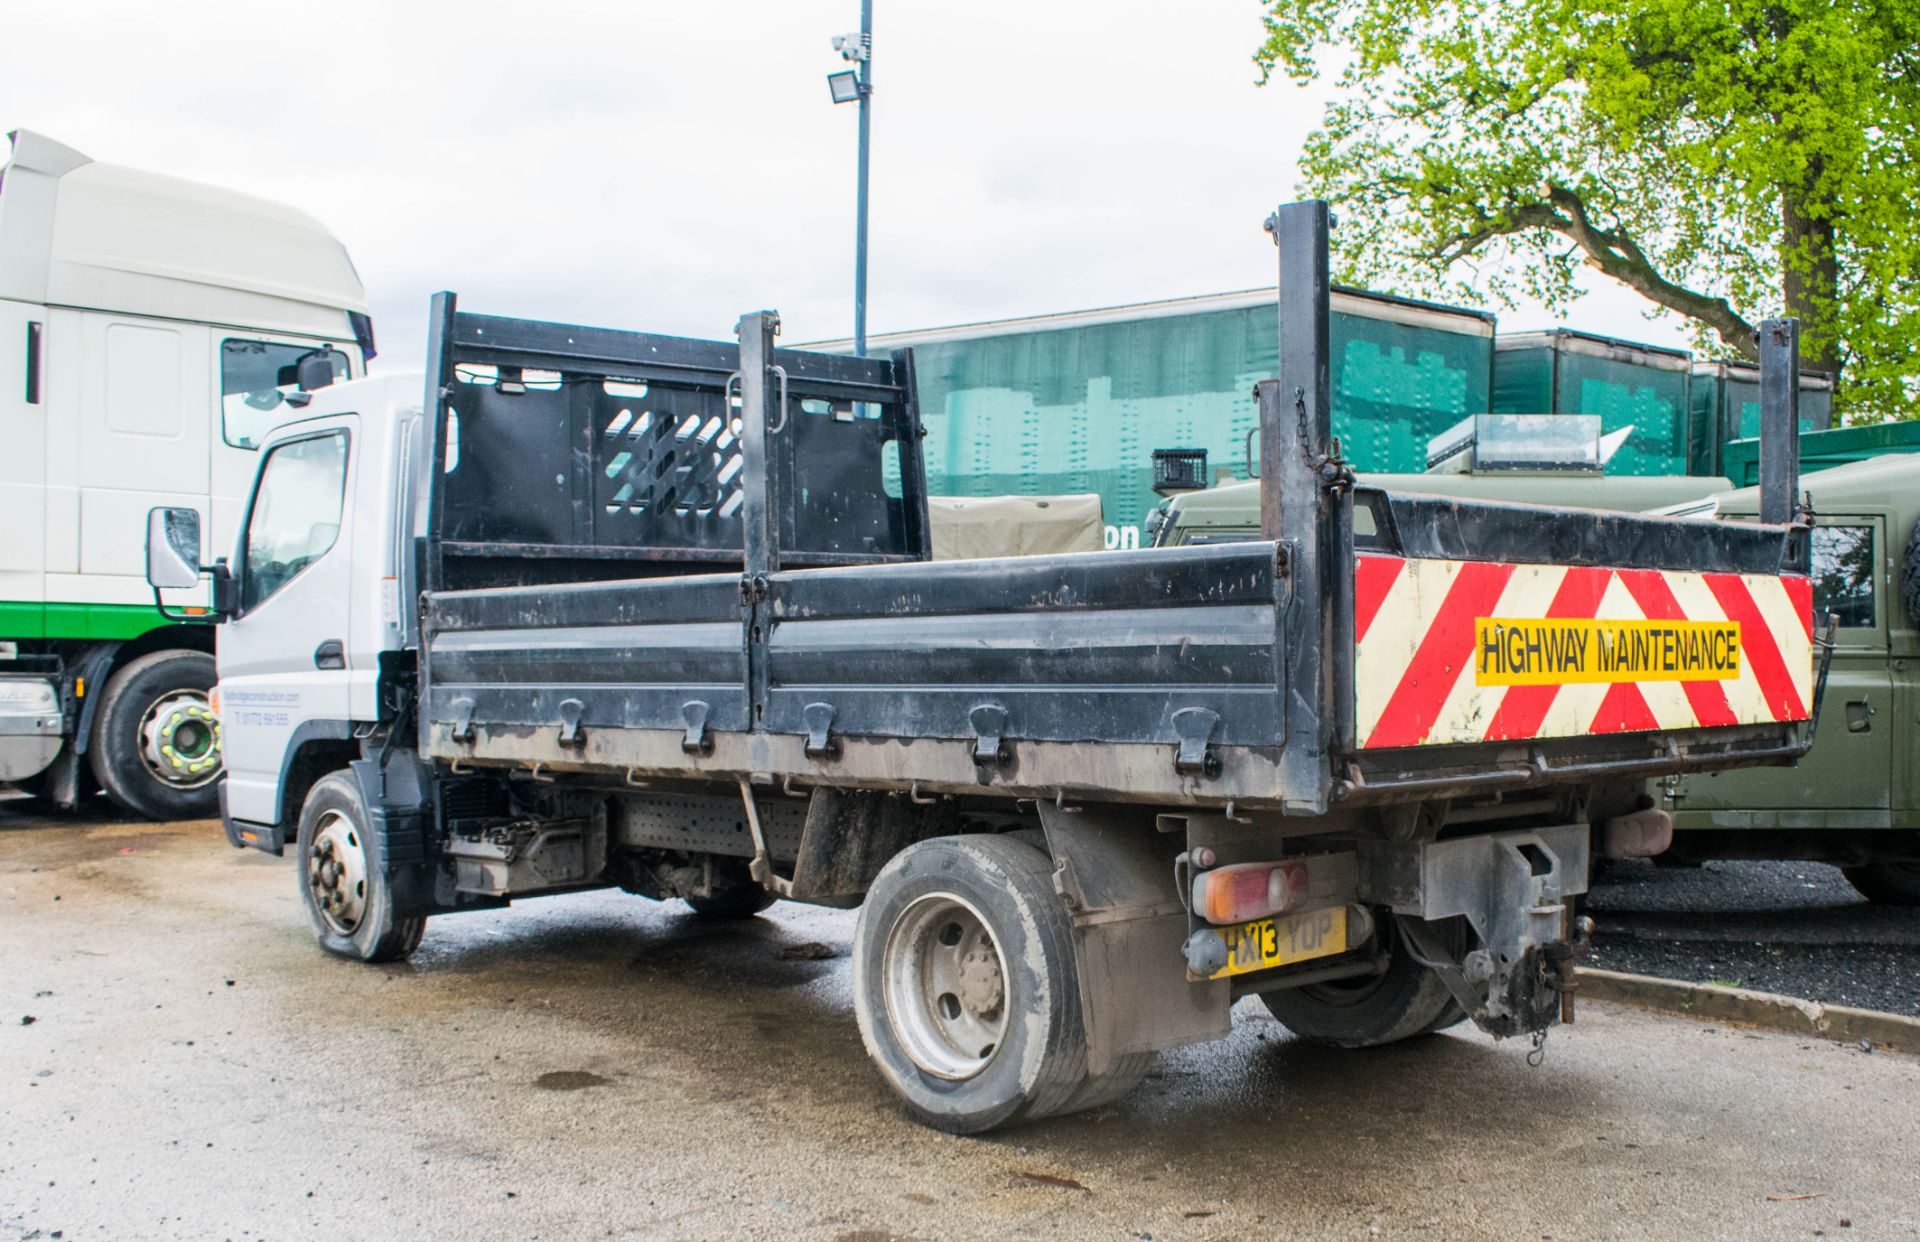 Mitsubishi Canter 7C15 7.5 tonne tipper Registration Number: HX13 YOP Date of Registration: 13/03/ - Image 4 of 16